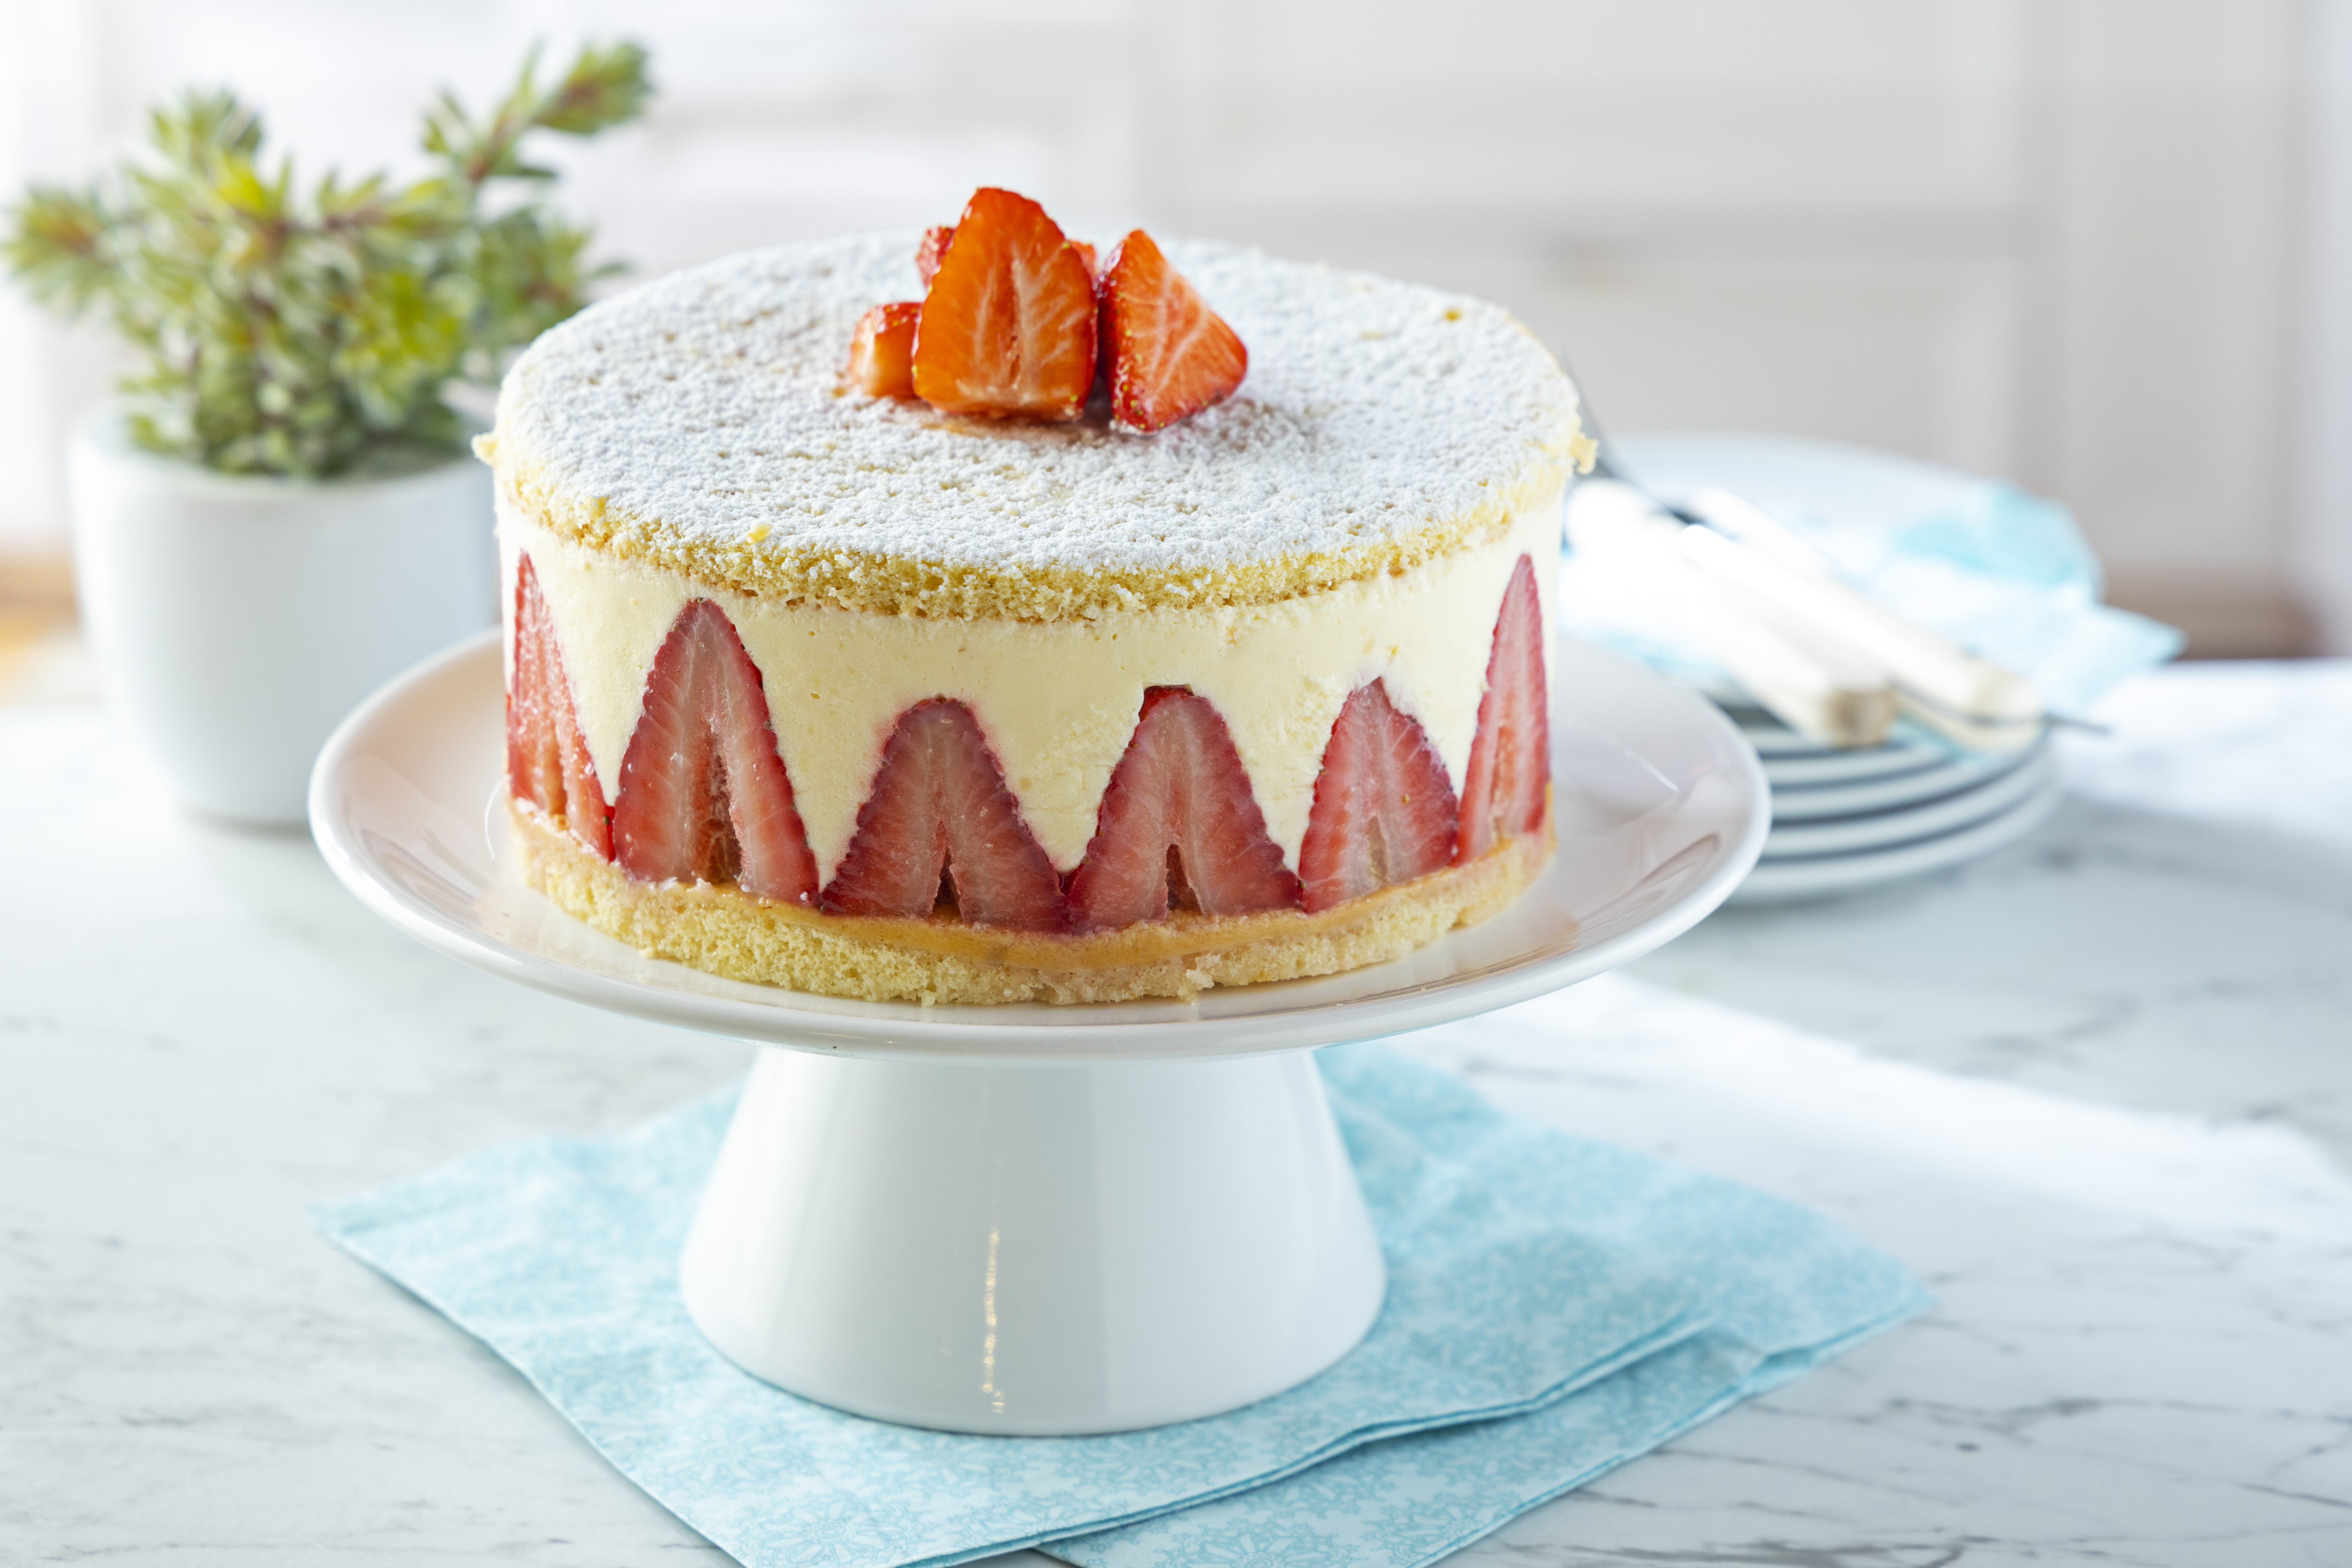 Gluten-Free Strawberry Fraisier Cake Recipe a old fashioned French treat.